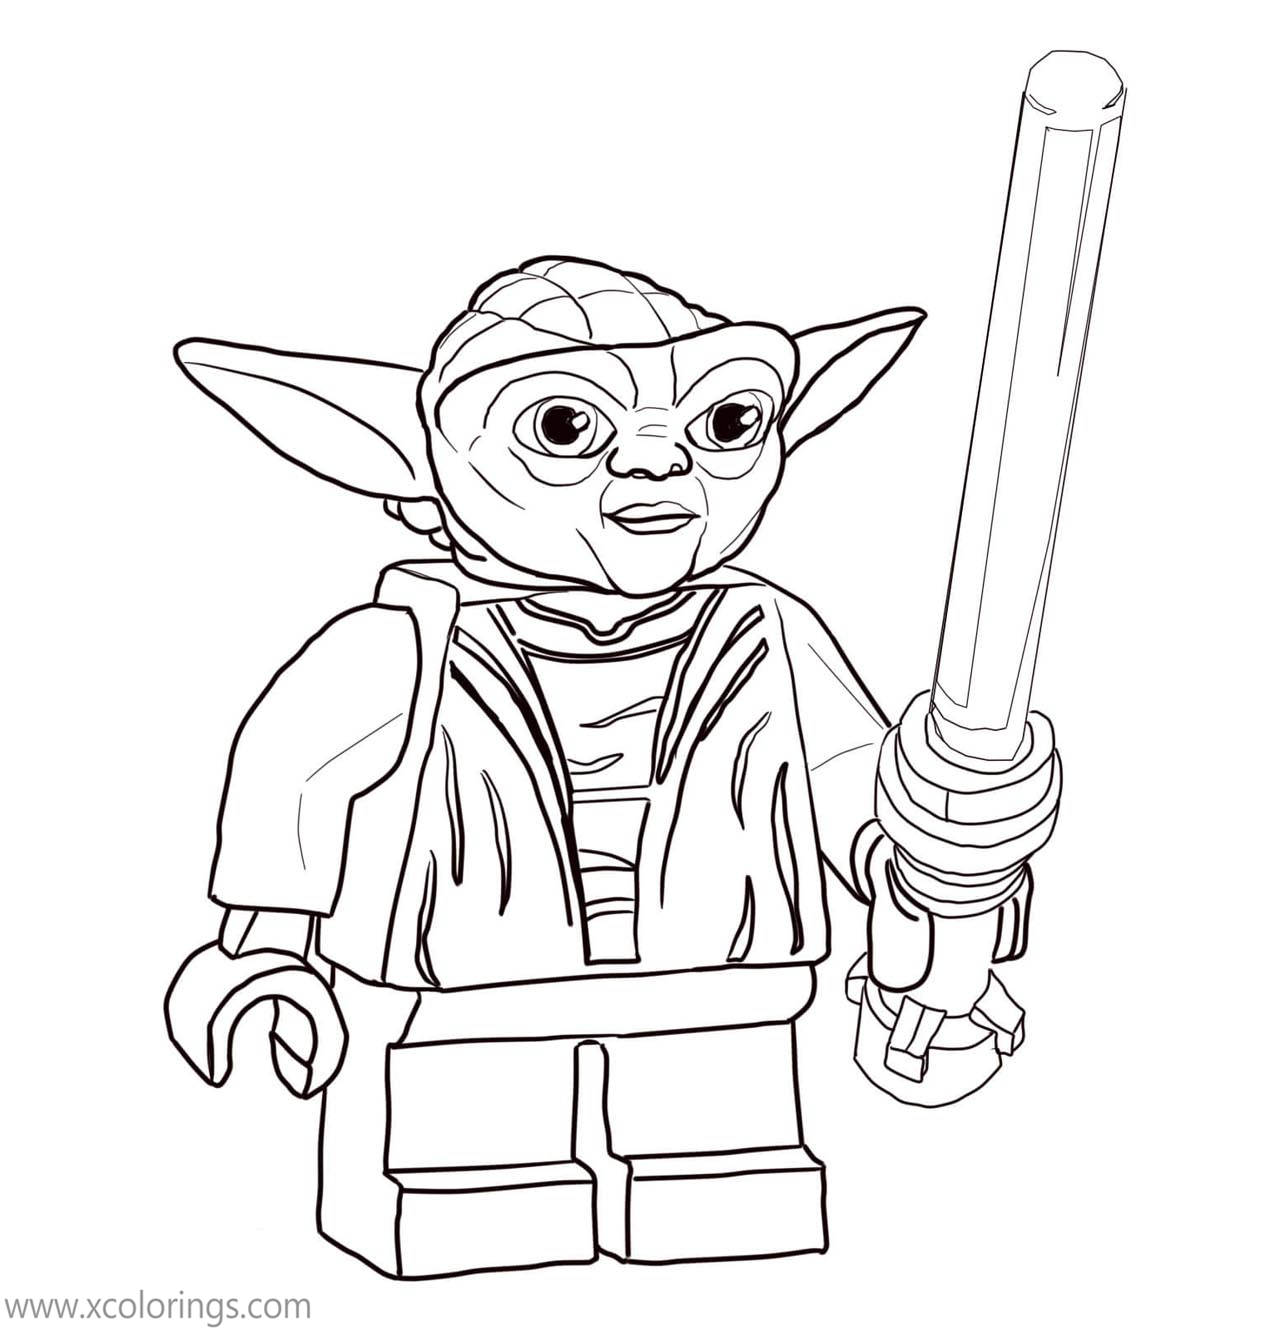 Free LEGO Baby Yoda Coloring Pages with Weapon printable